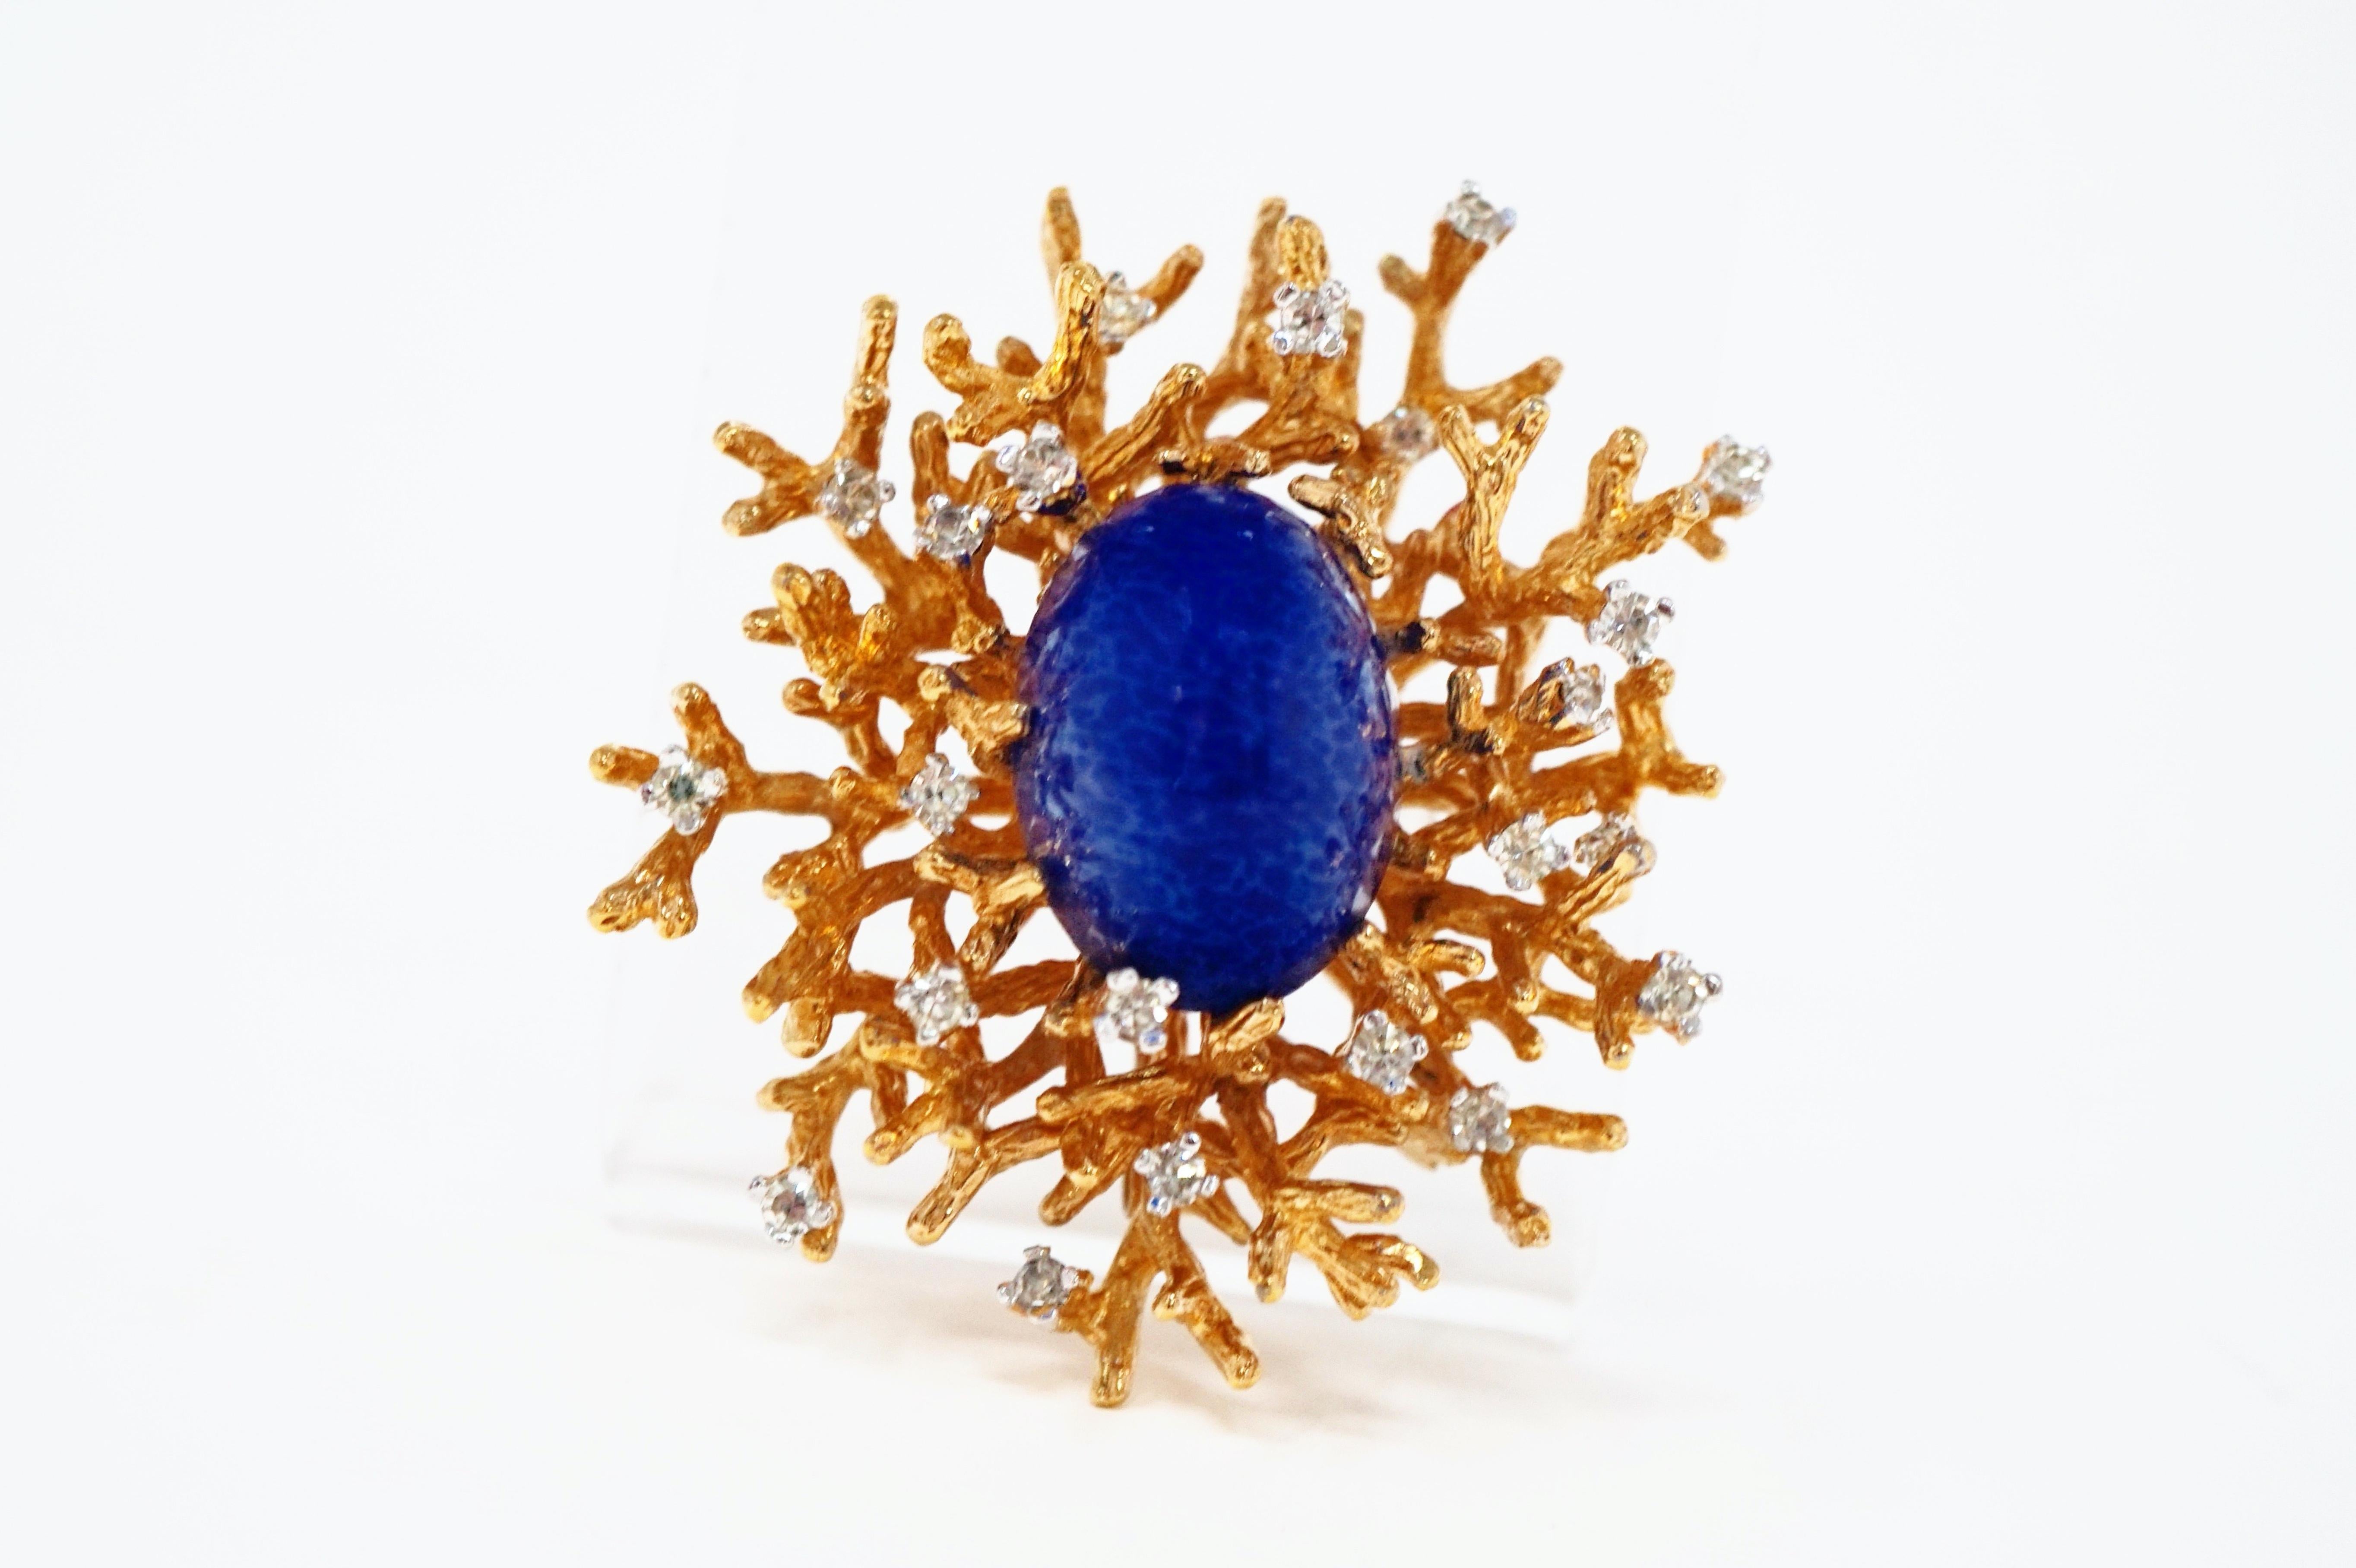 Exquisite gilt Brutalist-style abstract modern brooch with faux Lapis Lazuli centerpiece and rhinestone accents by Panetta, circa 1960.  This gorgeous piece will be a quick favorite in your vintage jewelry collection!

ABOUT PANETTA:
Panetta was